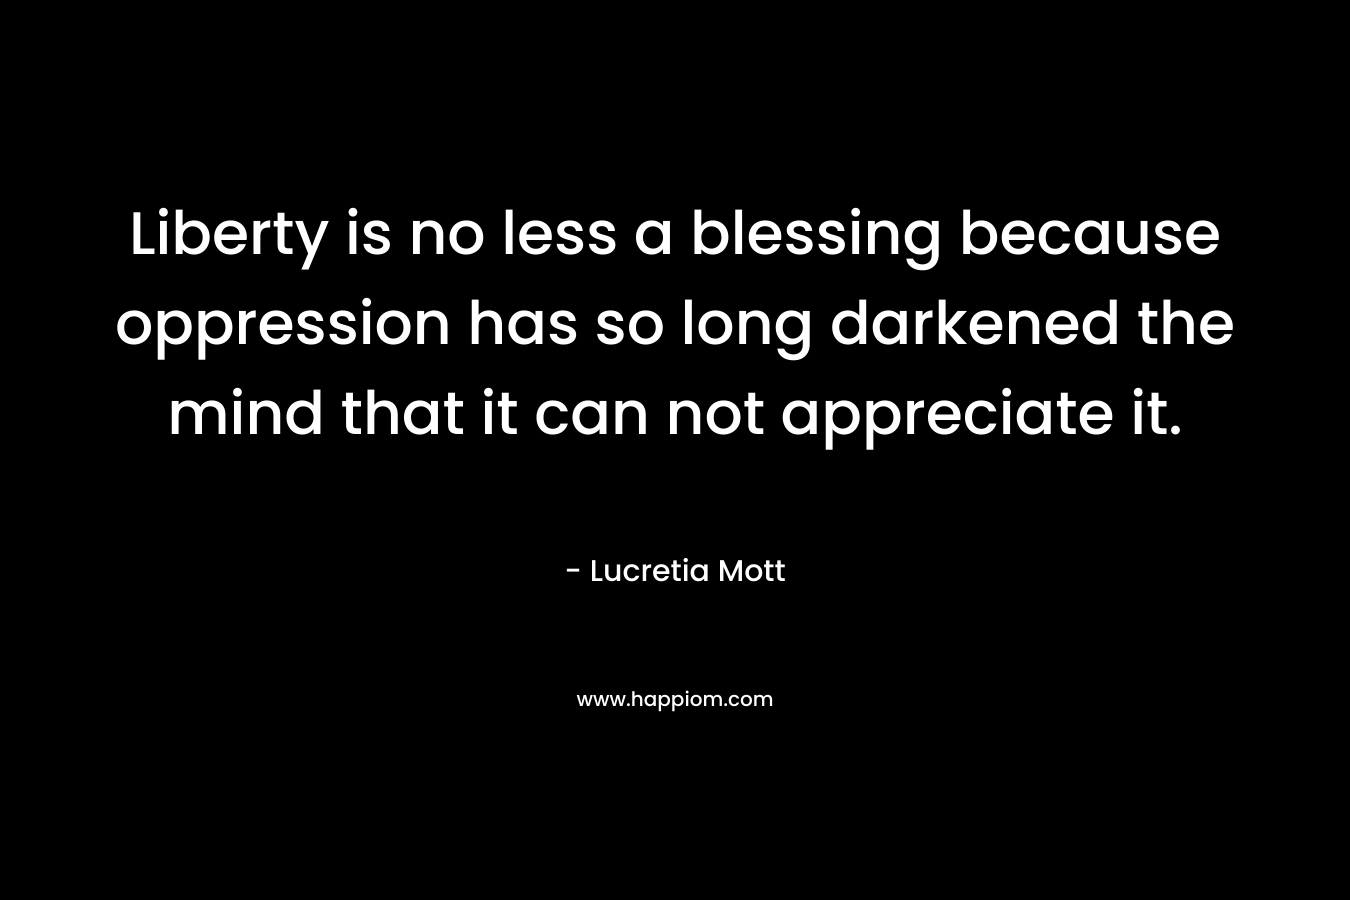 Liberty is no less a blessing because oppression has so long darkened the mind that it can not appreciate it.